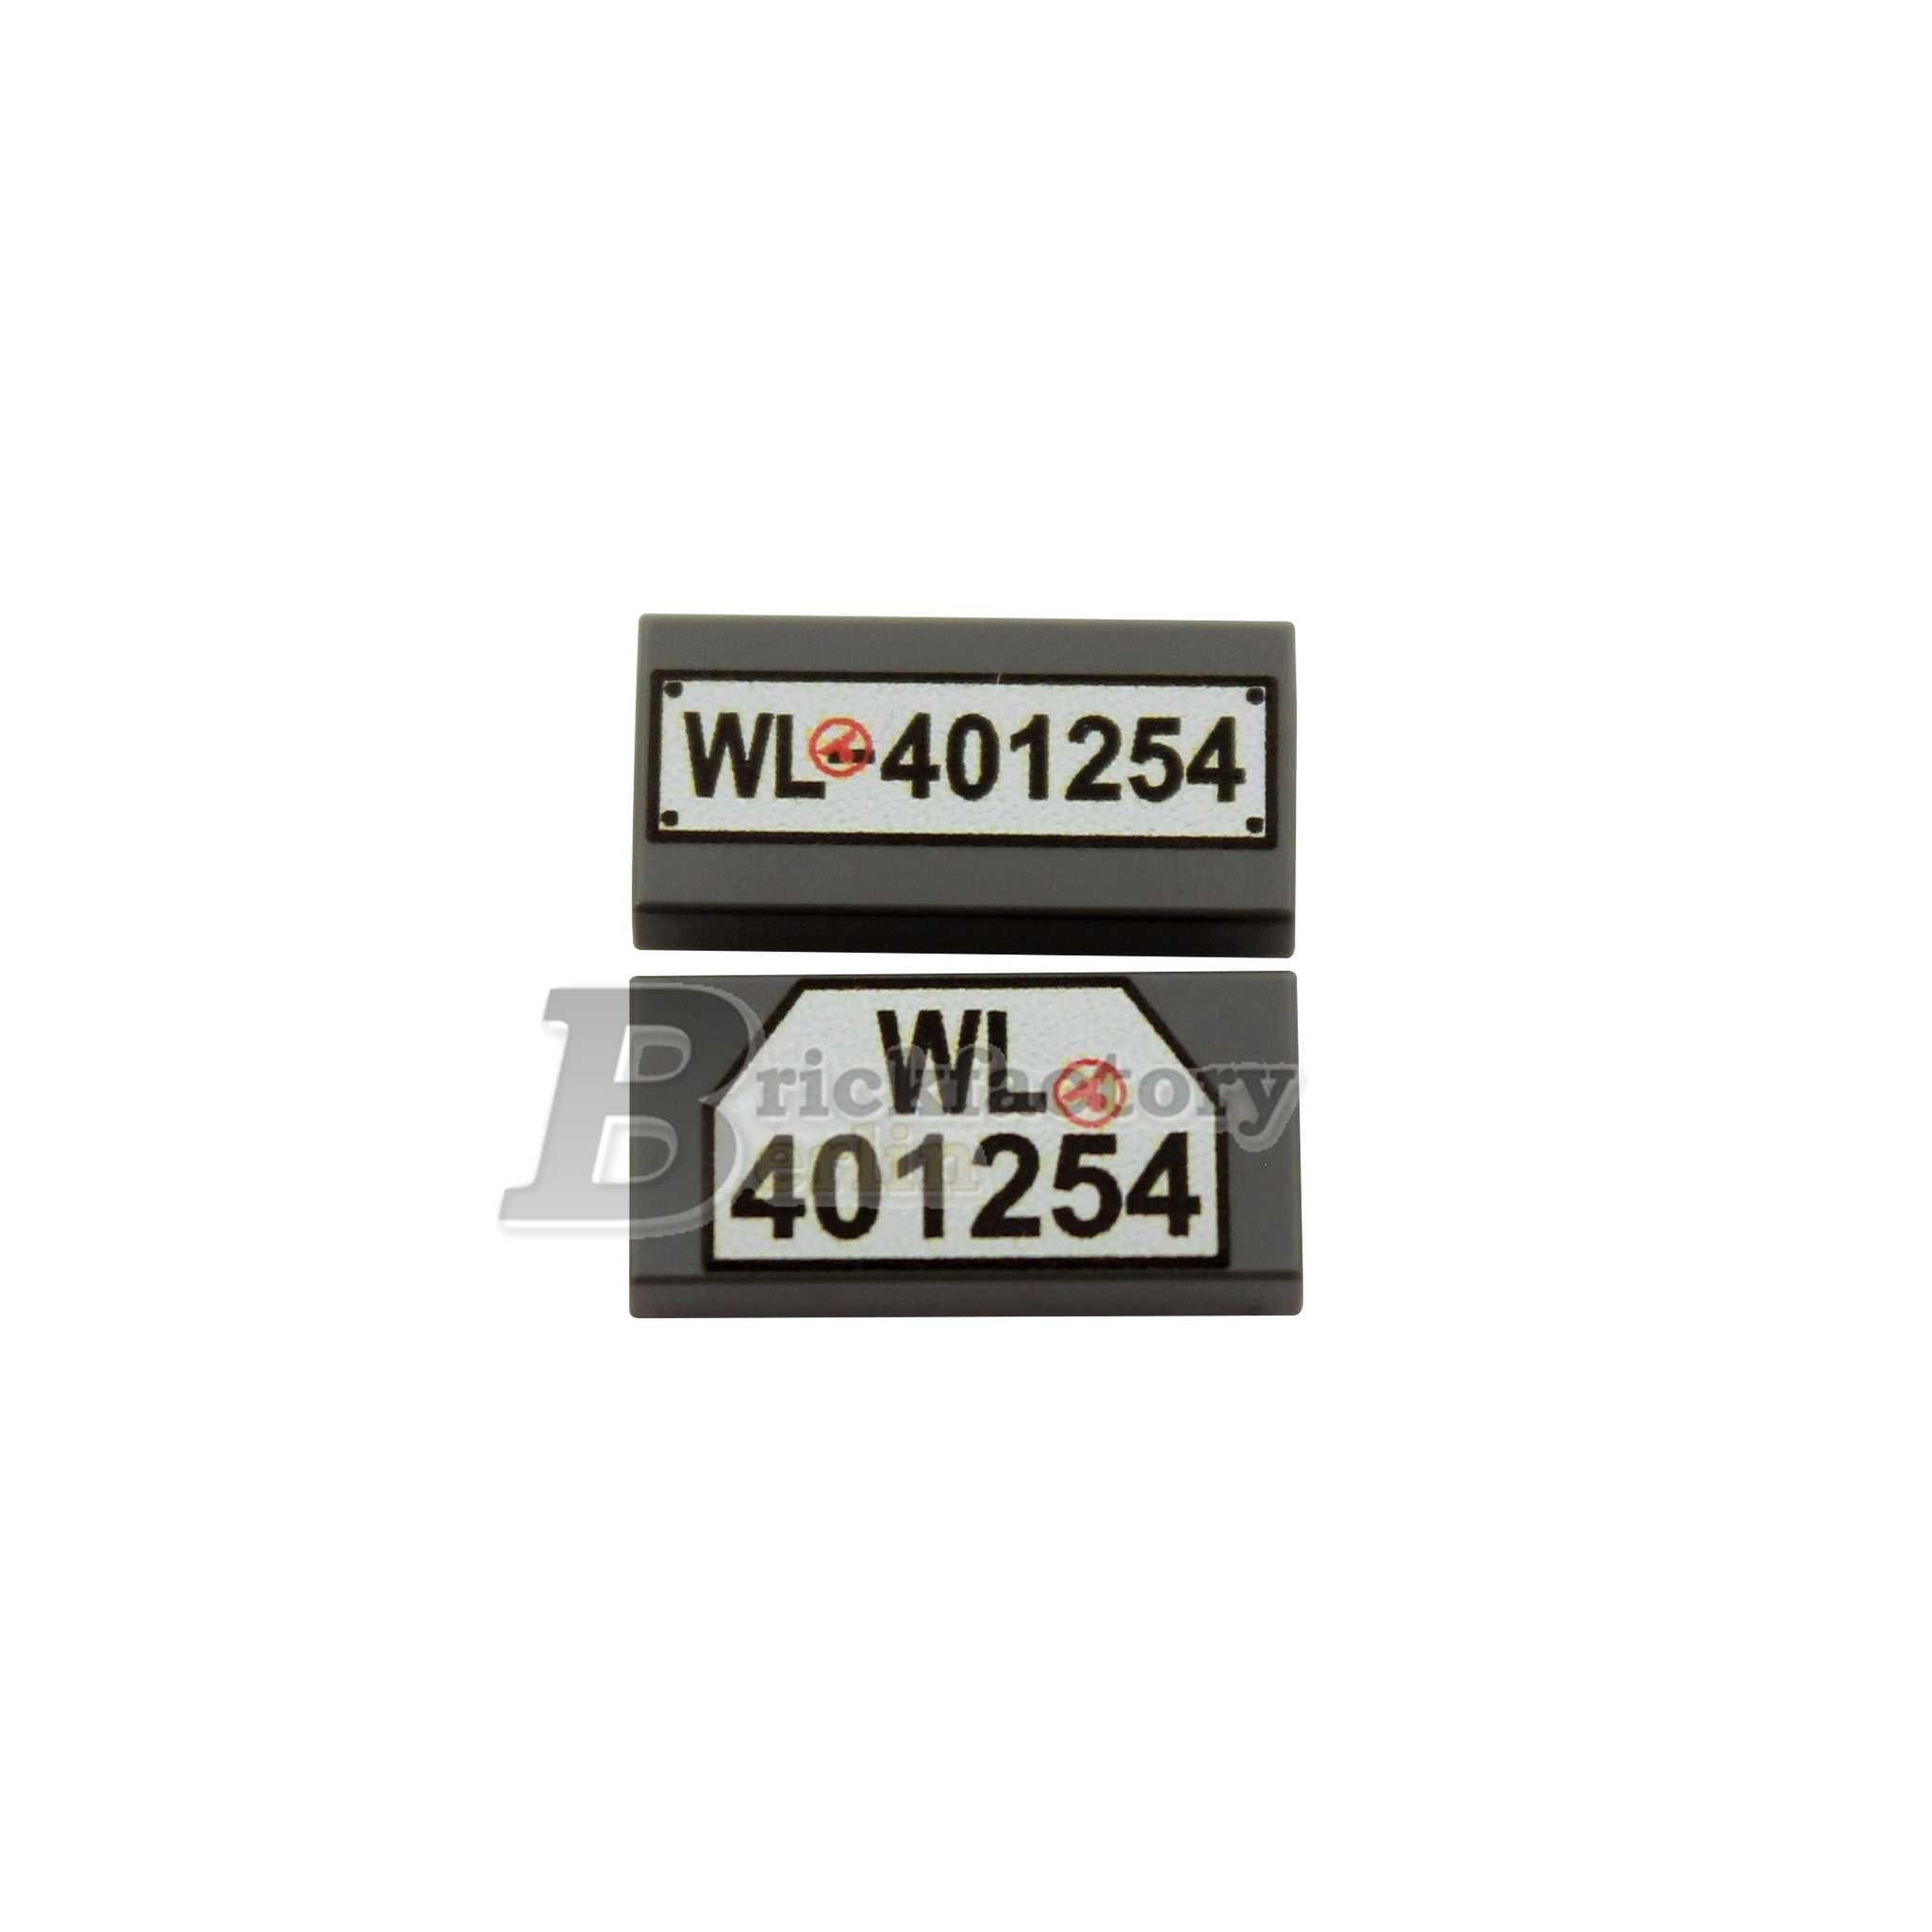 BF-0363A - 2-pack License Plate Set-1 (Color: Dark Gray) Printed-LEGO® Tiles-1x2